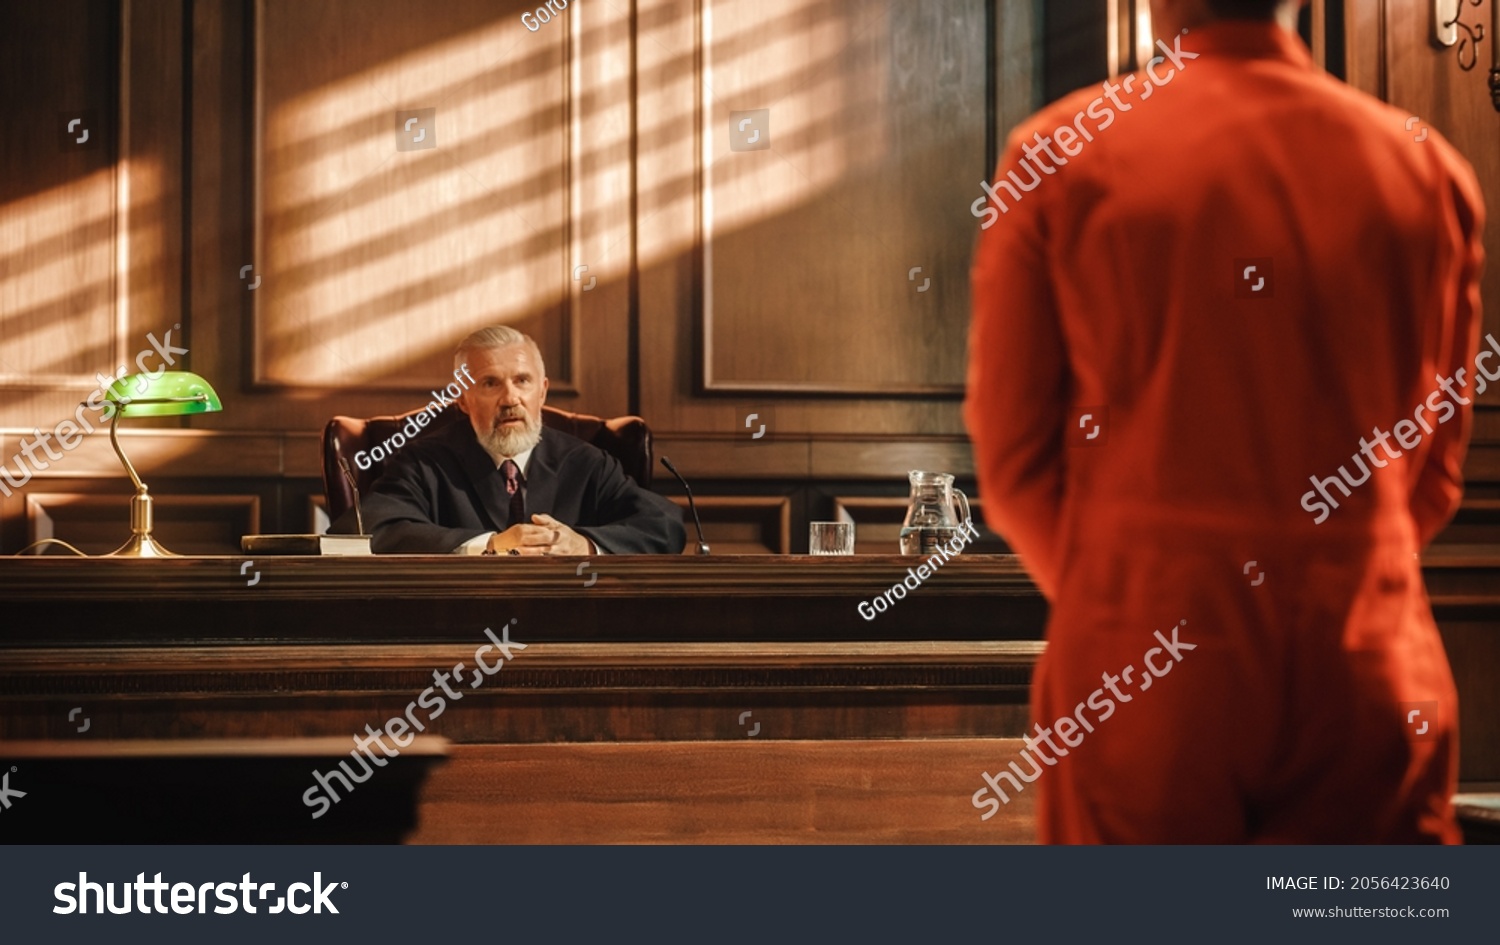 Court of Law and Justice Trial Proceedings: Law Offender in Orange Jumpsuit is Questioned and Giving Testimony to Judge, Jury. Criminal Denying Charges, Pleading, Inmate Denied Parole. #2056423640